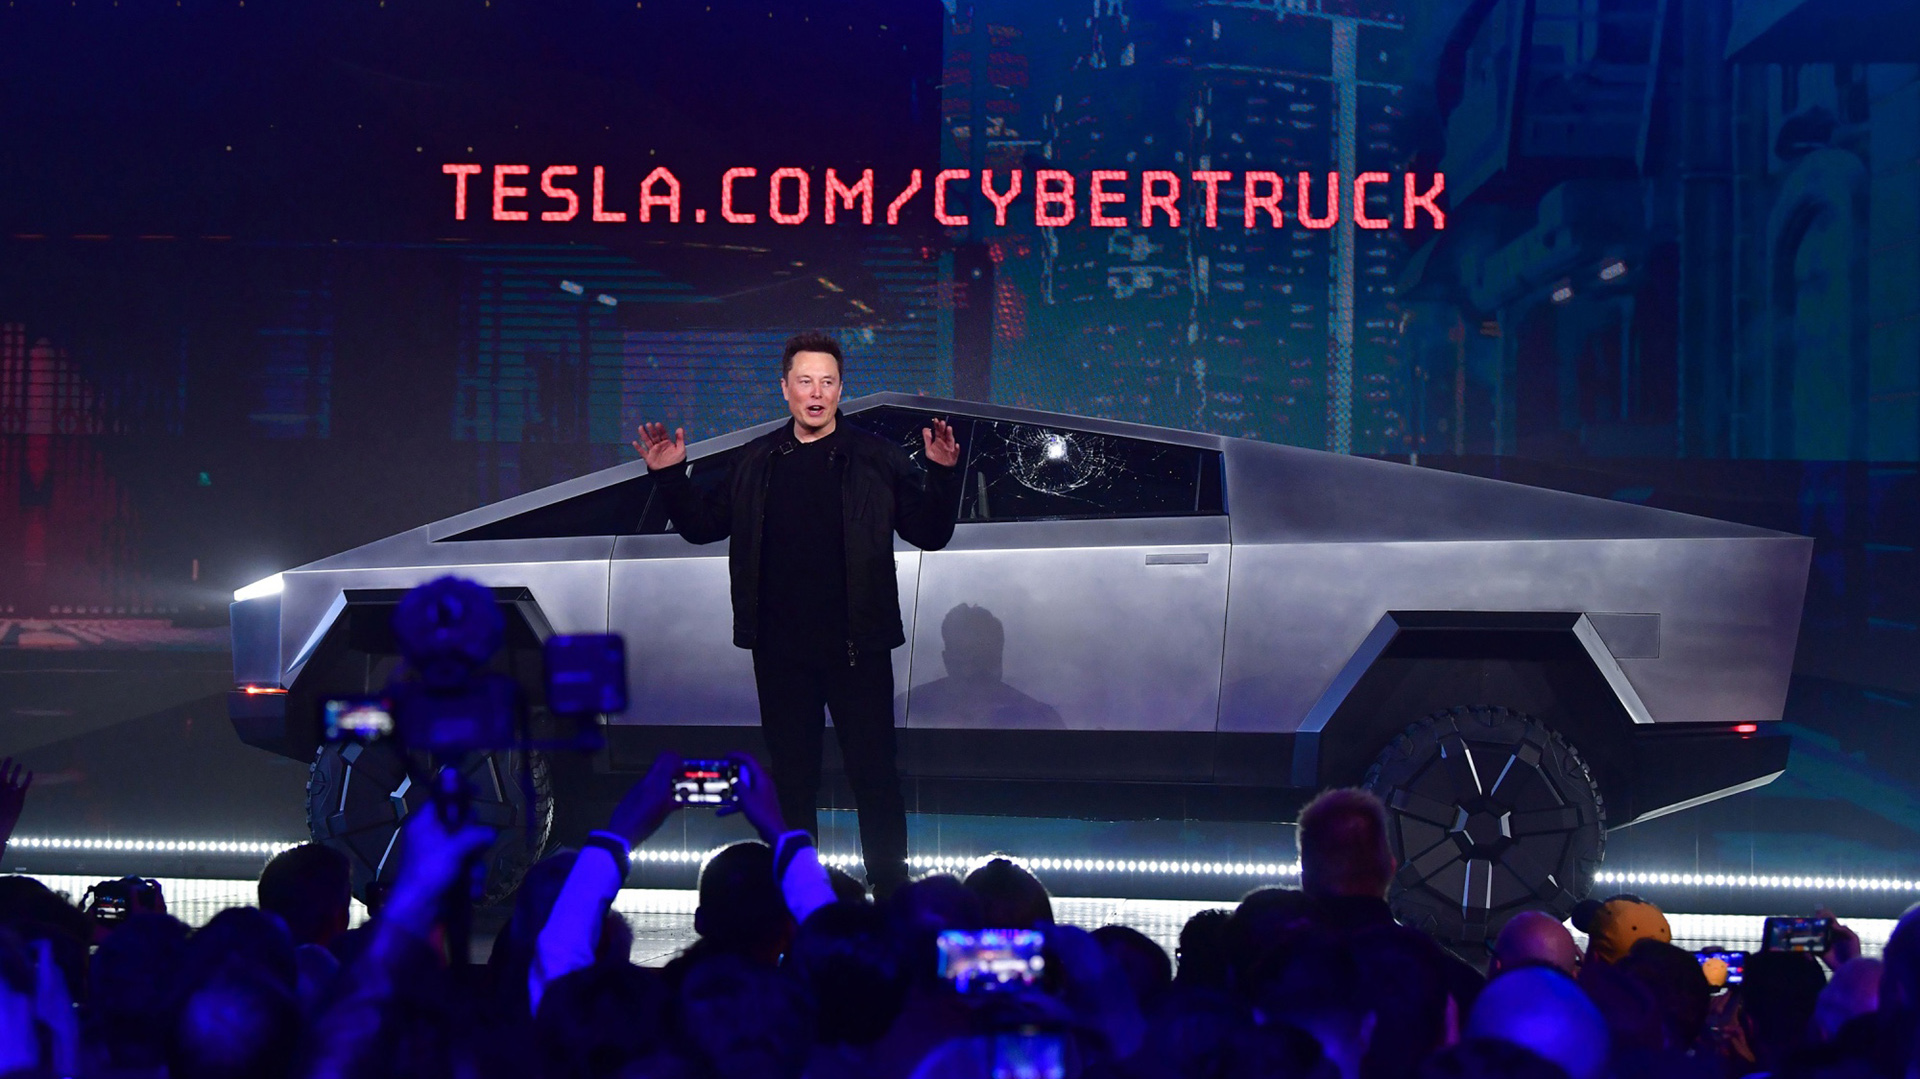 The initial price of the Tesla Cybertruck will go from $39,900 in 2019 to a figure not yet announced by the company.